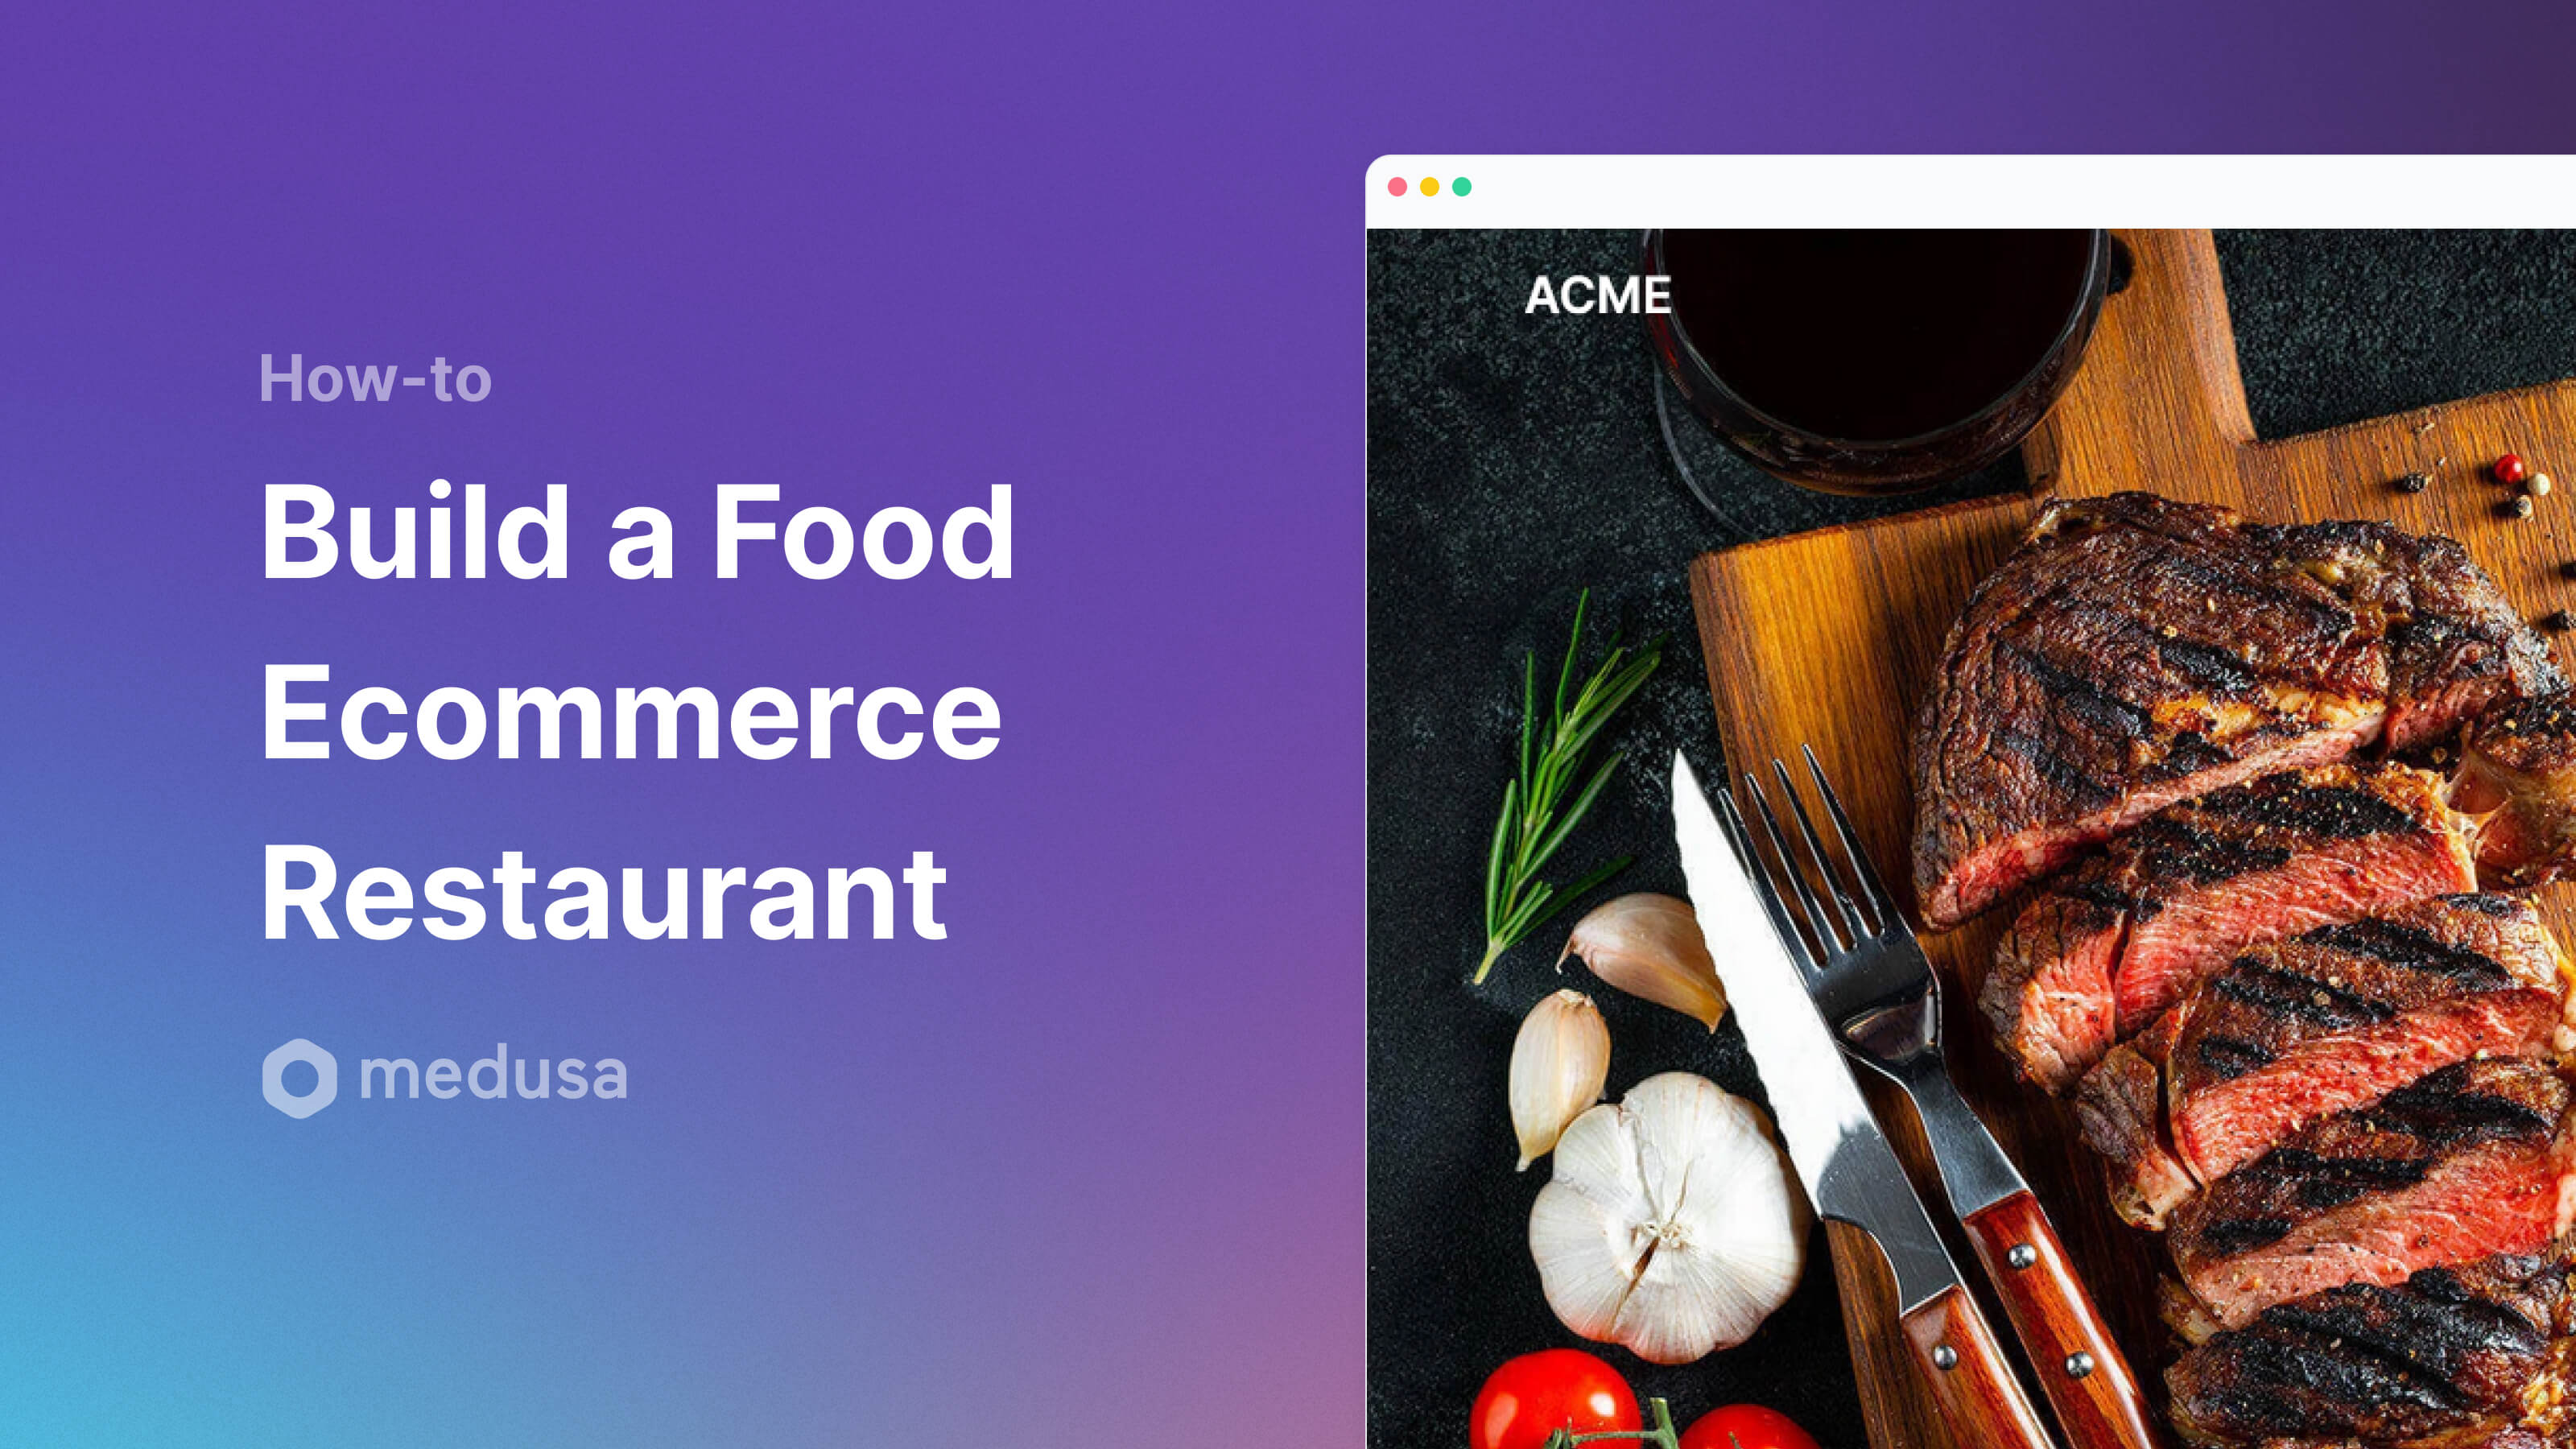 Next.js Storefront: Building a Food Ecommerce Restaurant with Medusa and Paystack